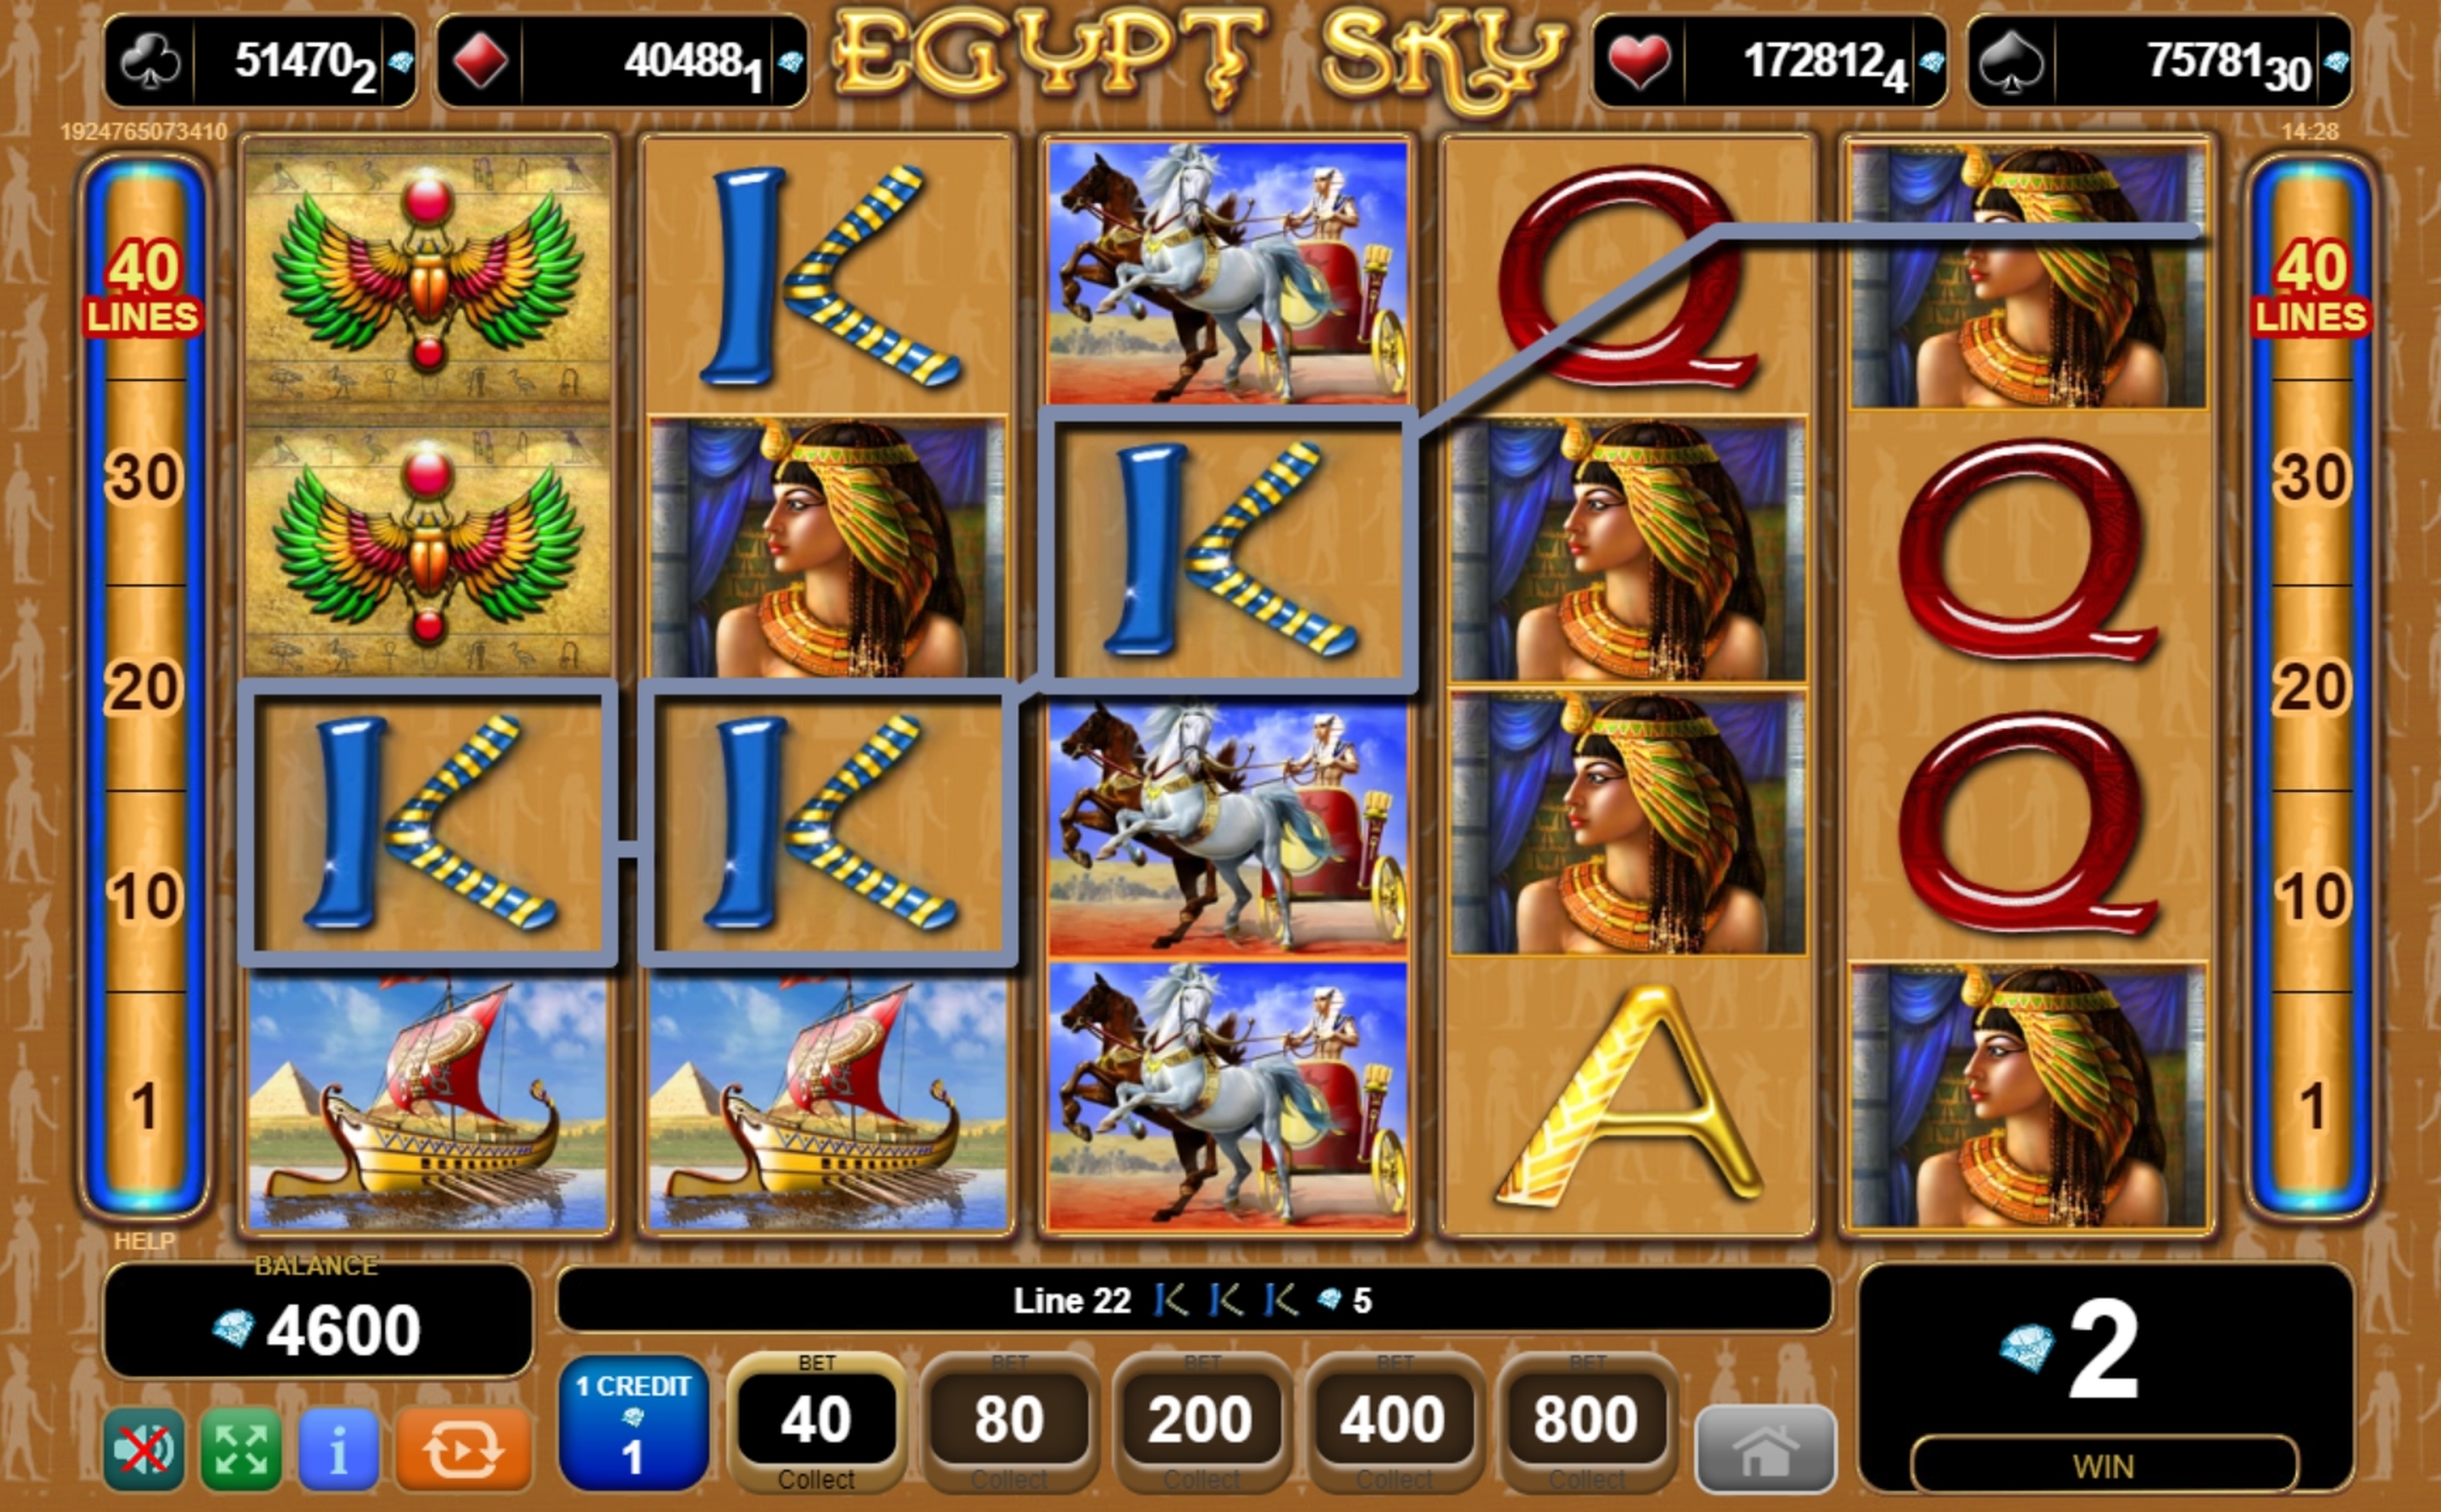 Win Money in Egypt Sky Free Slot Game by EGT